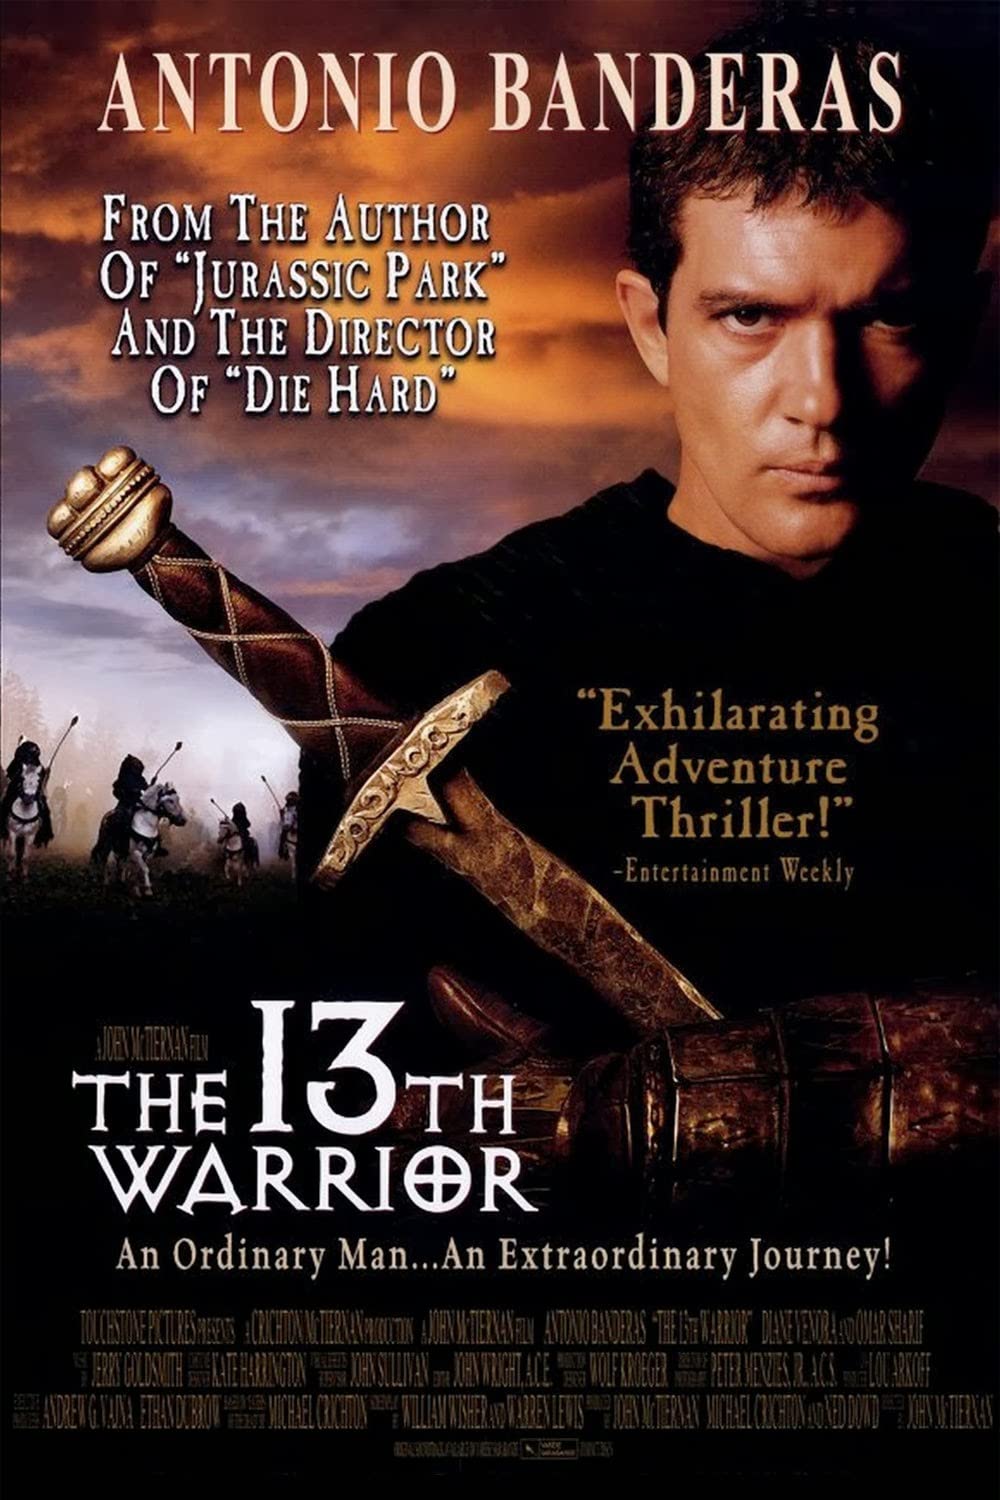 The 13th Warrior (1999) Best Knight Movies to Add in Your Watchlist